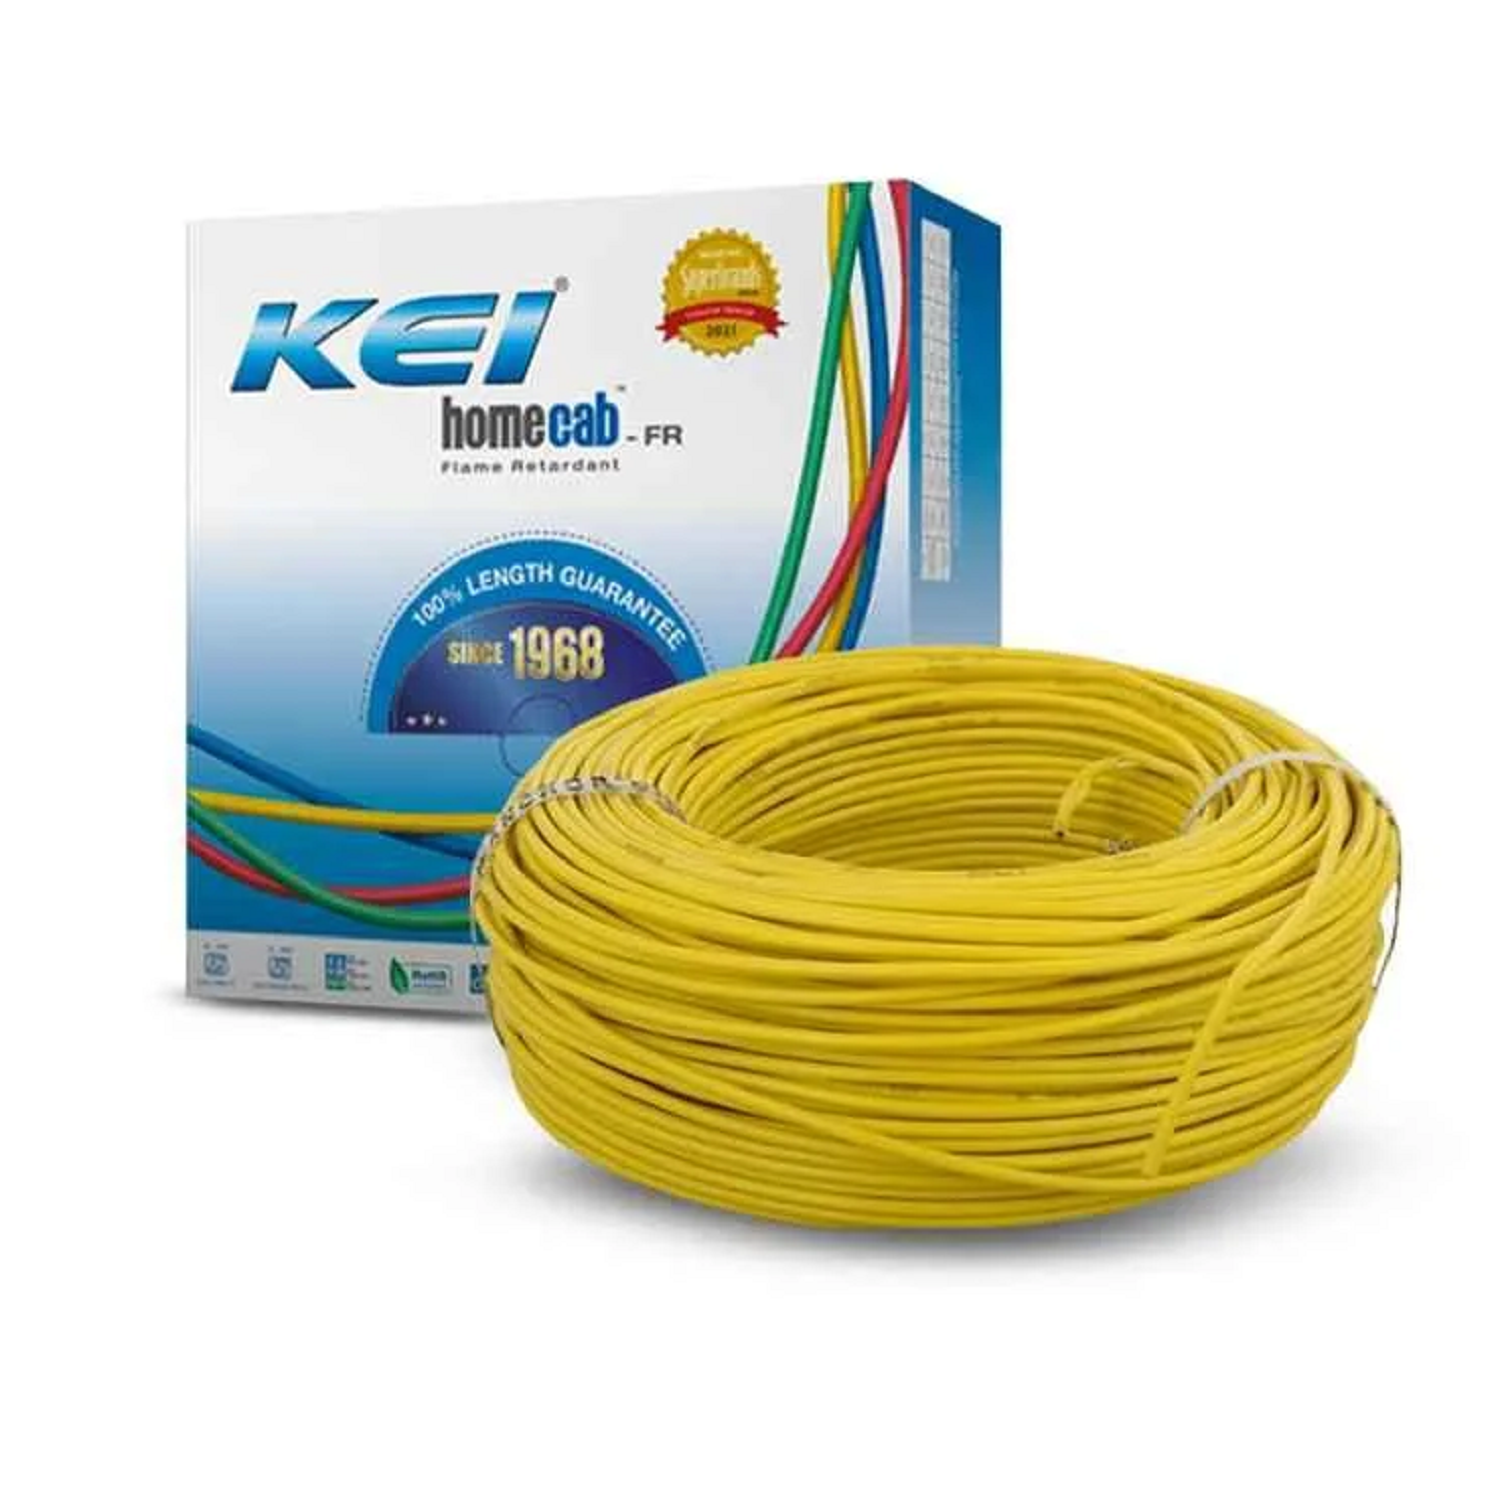 4.0 Sqmm KEI FR Single Core Copper Wire (90 Mtr) With PVC Insulated for House 38 Industrial Uses (Ye